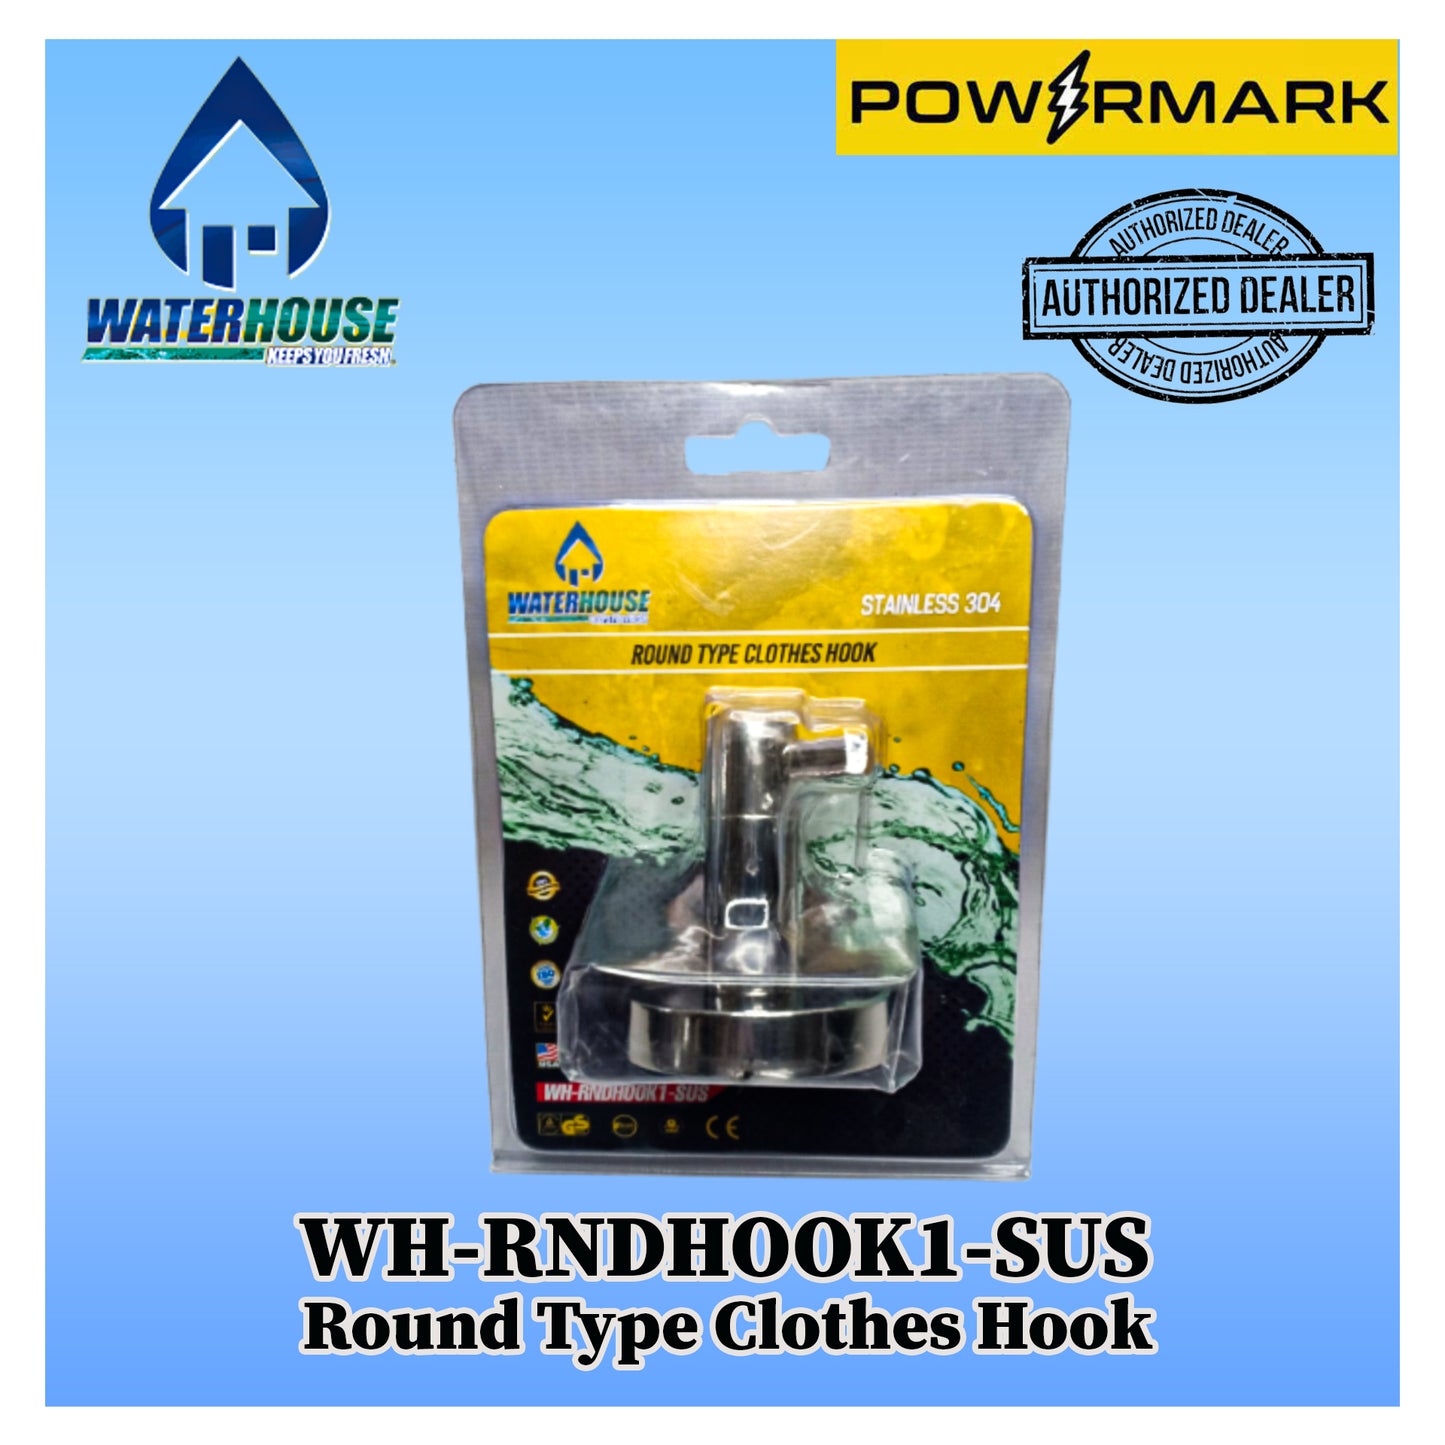 WATERHOUSE WH-RNDHOOK1-SUS Round Type Clothes Hook